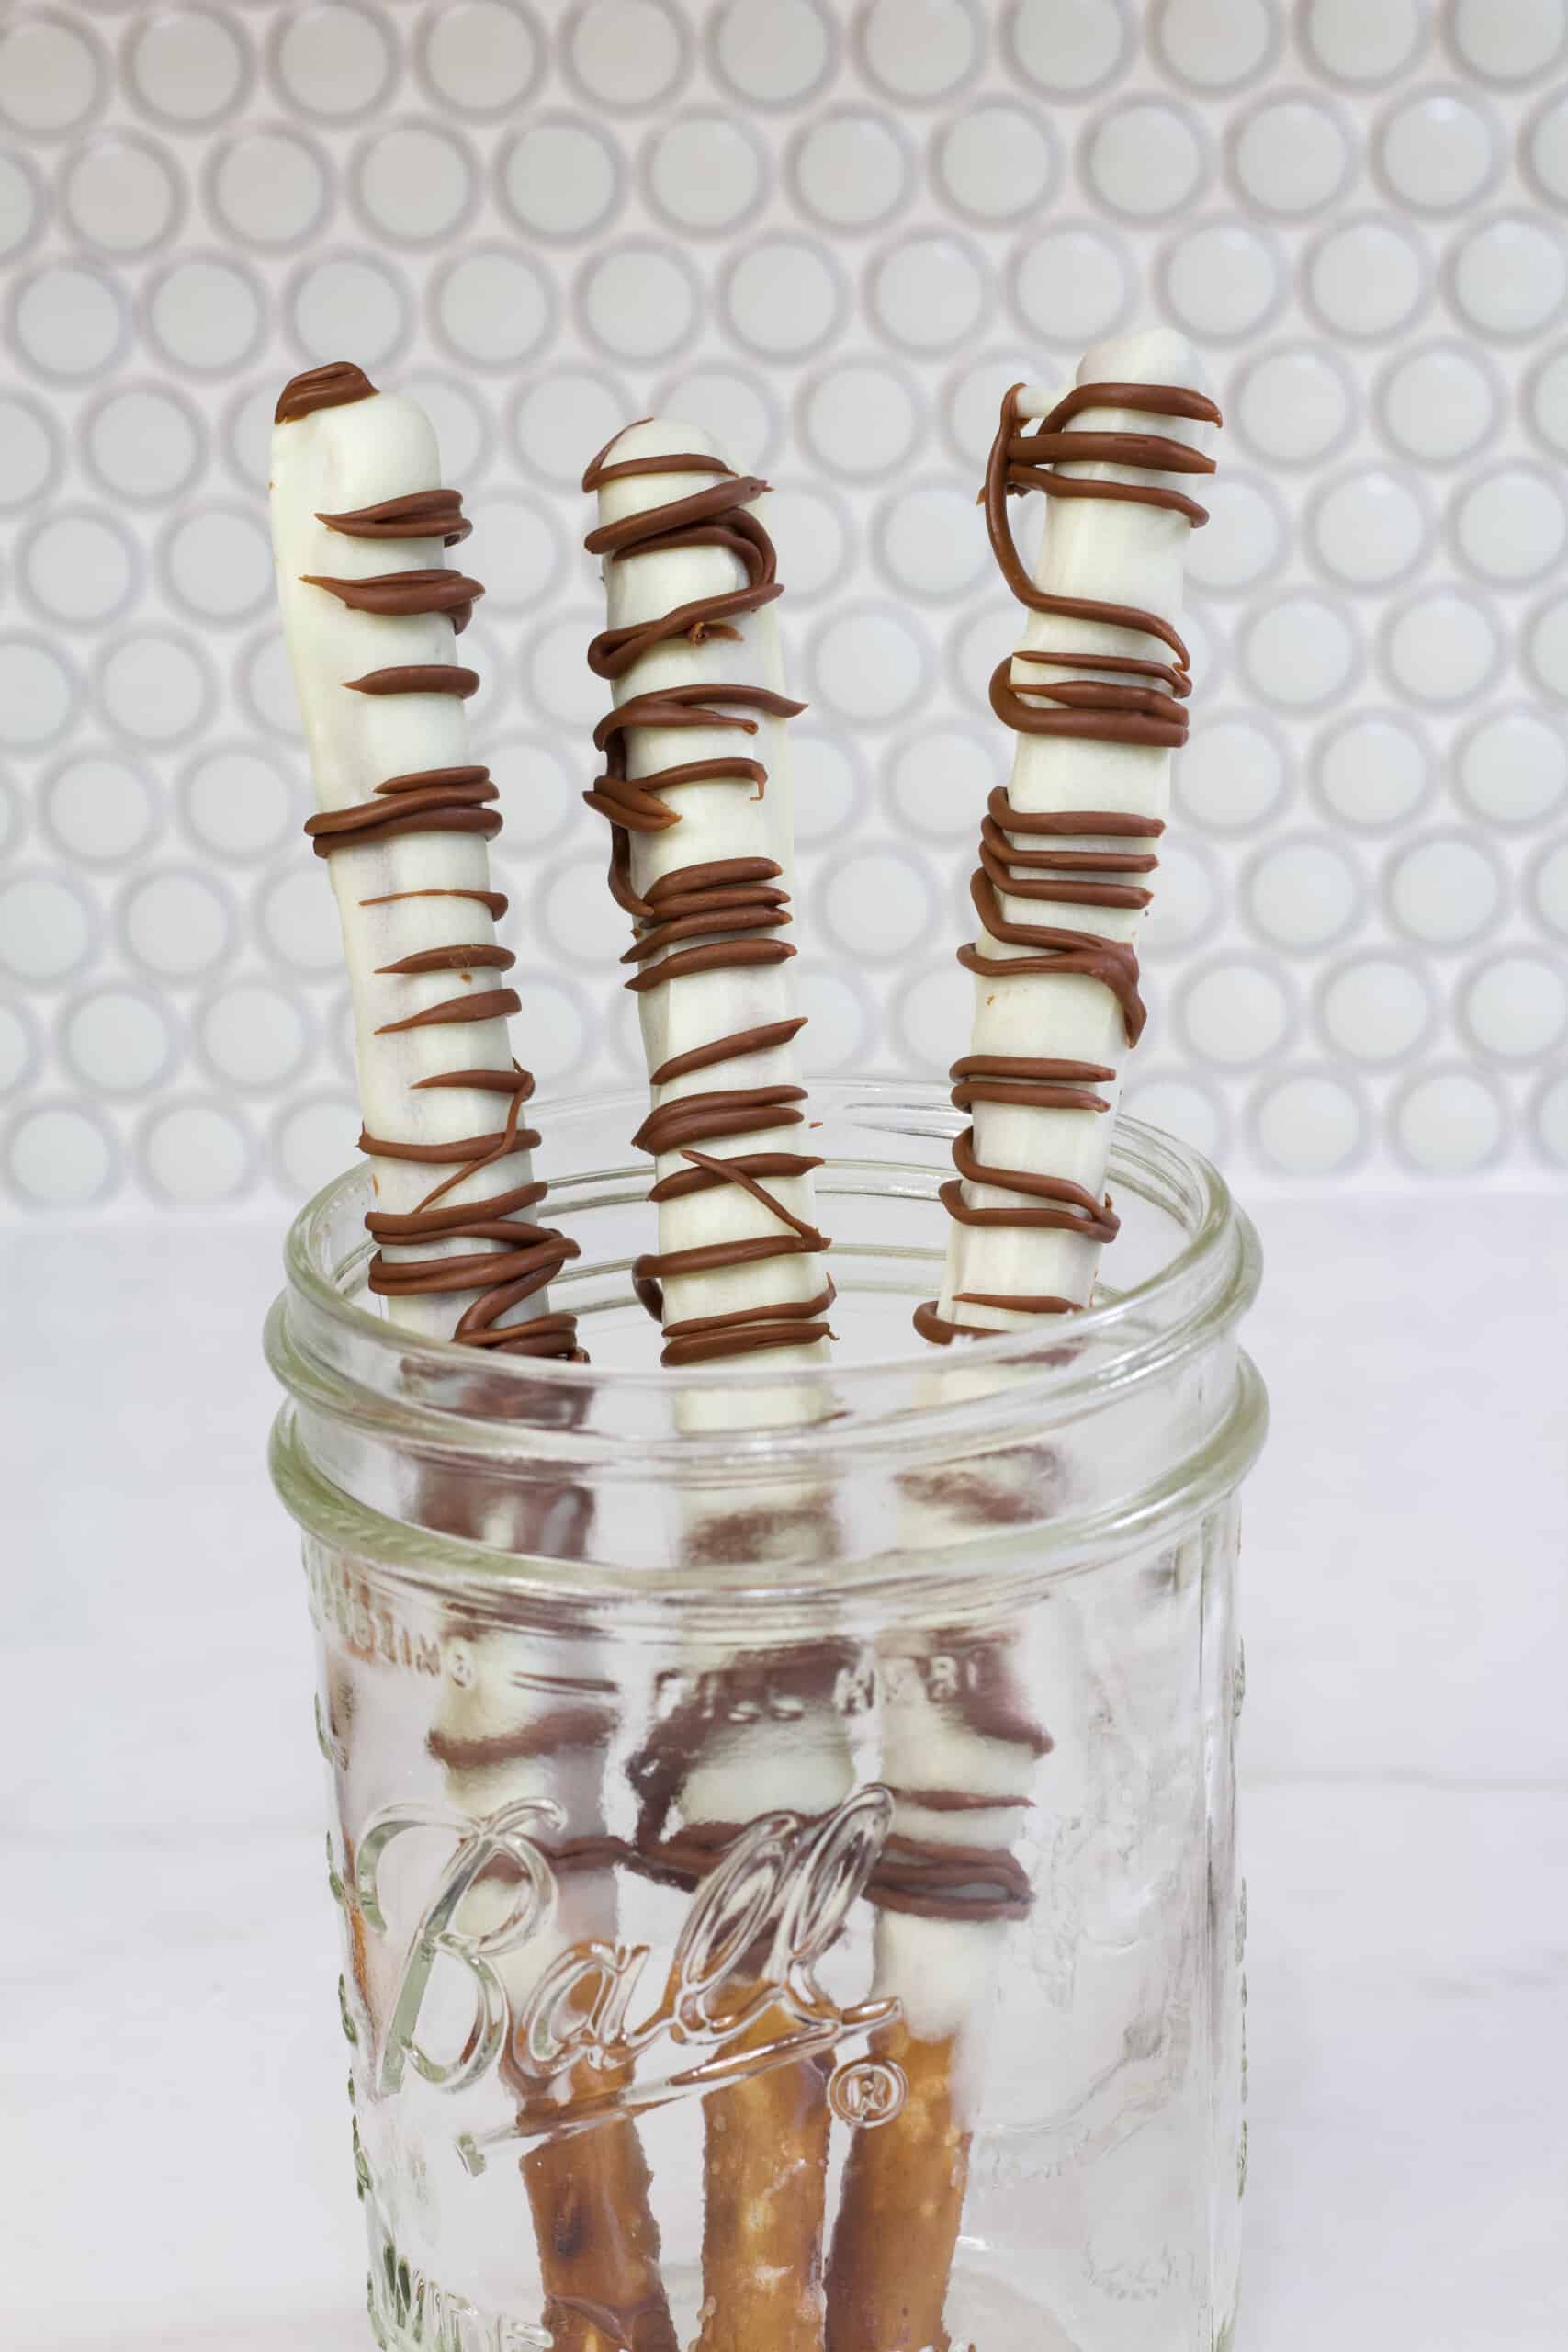 Three pretzel rods that have been dipped in white chocolate and have milk chocolate drizzled over them.